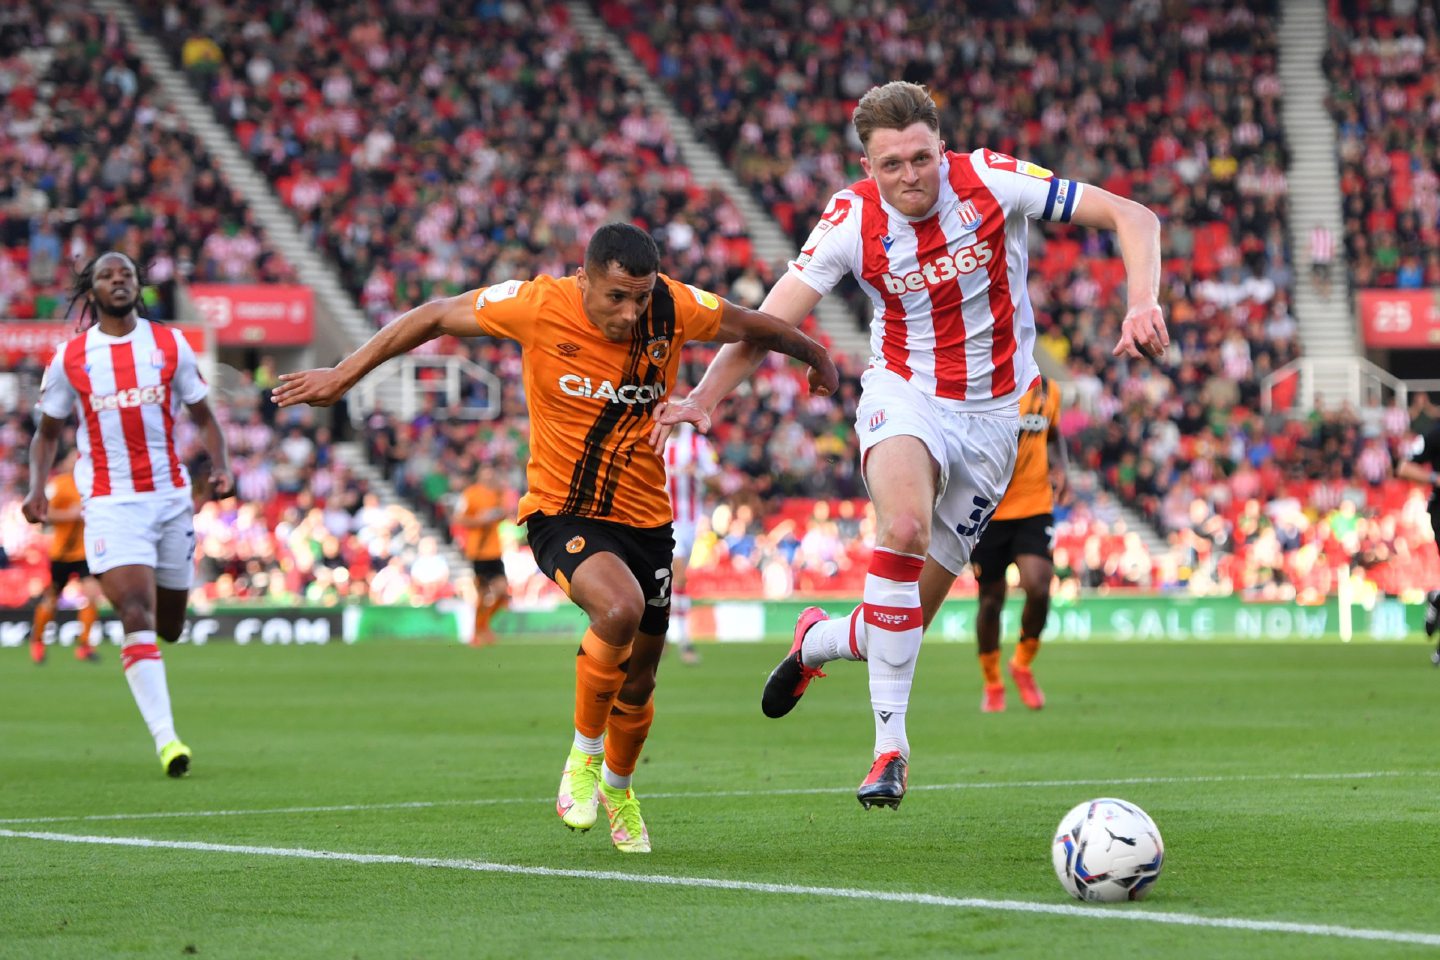 Harry Souttar in action for stoke City last season. Image: Anthony Devlin/PA Wire.